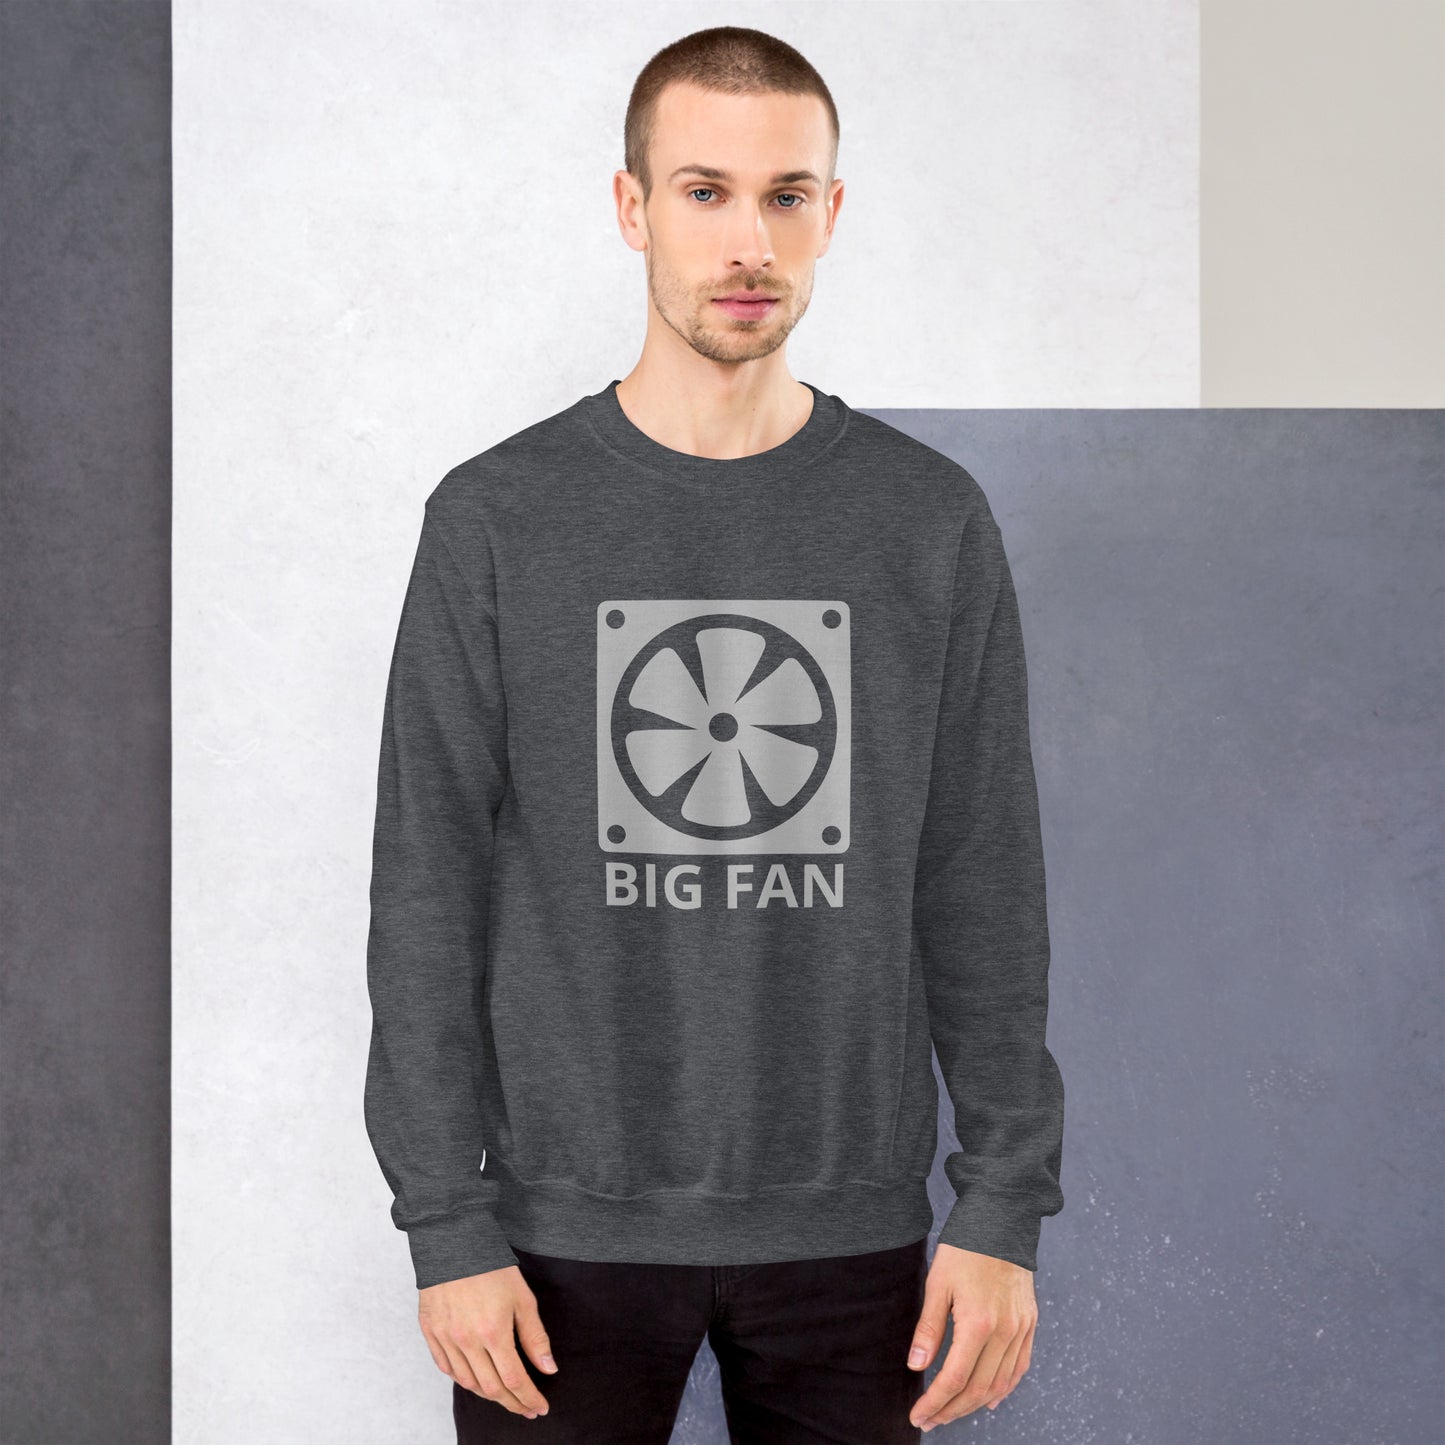 Men with dark grey sweatshirt with image of a big computer fan and the text "BIG FAN"